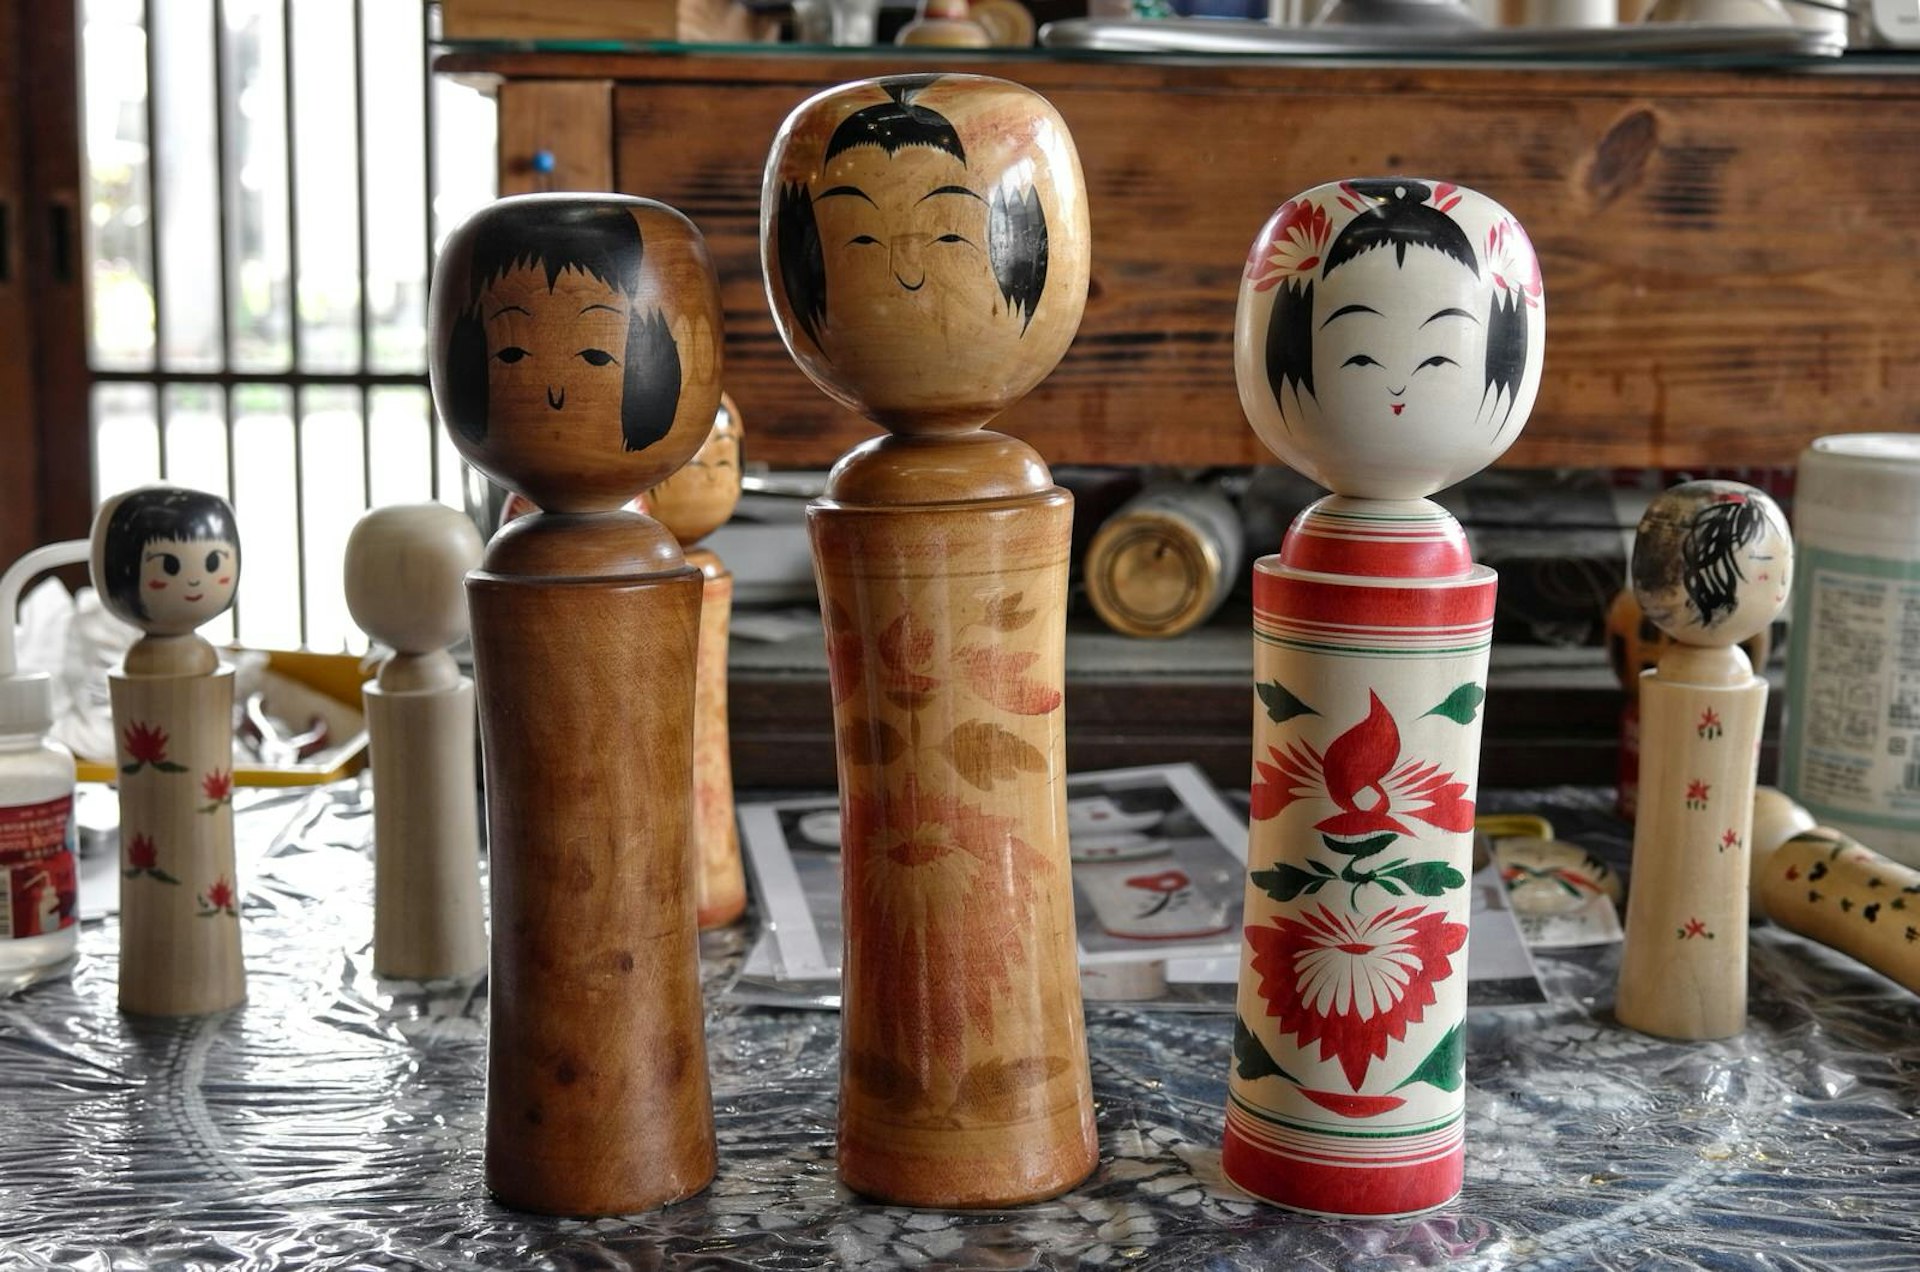 Three kokeshi dolls, made by three generations of artisan, stand on a table in the workshop of Yasuo Okazaki © Manami Okazaki / Lonely Planet